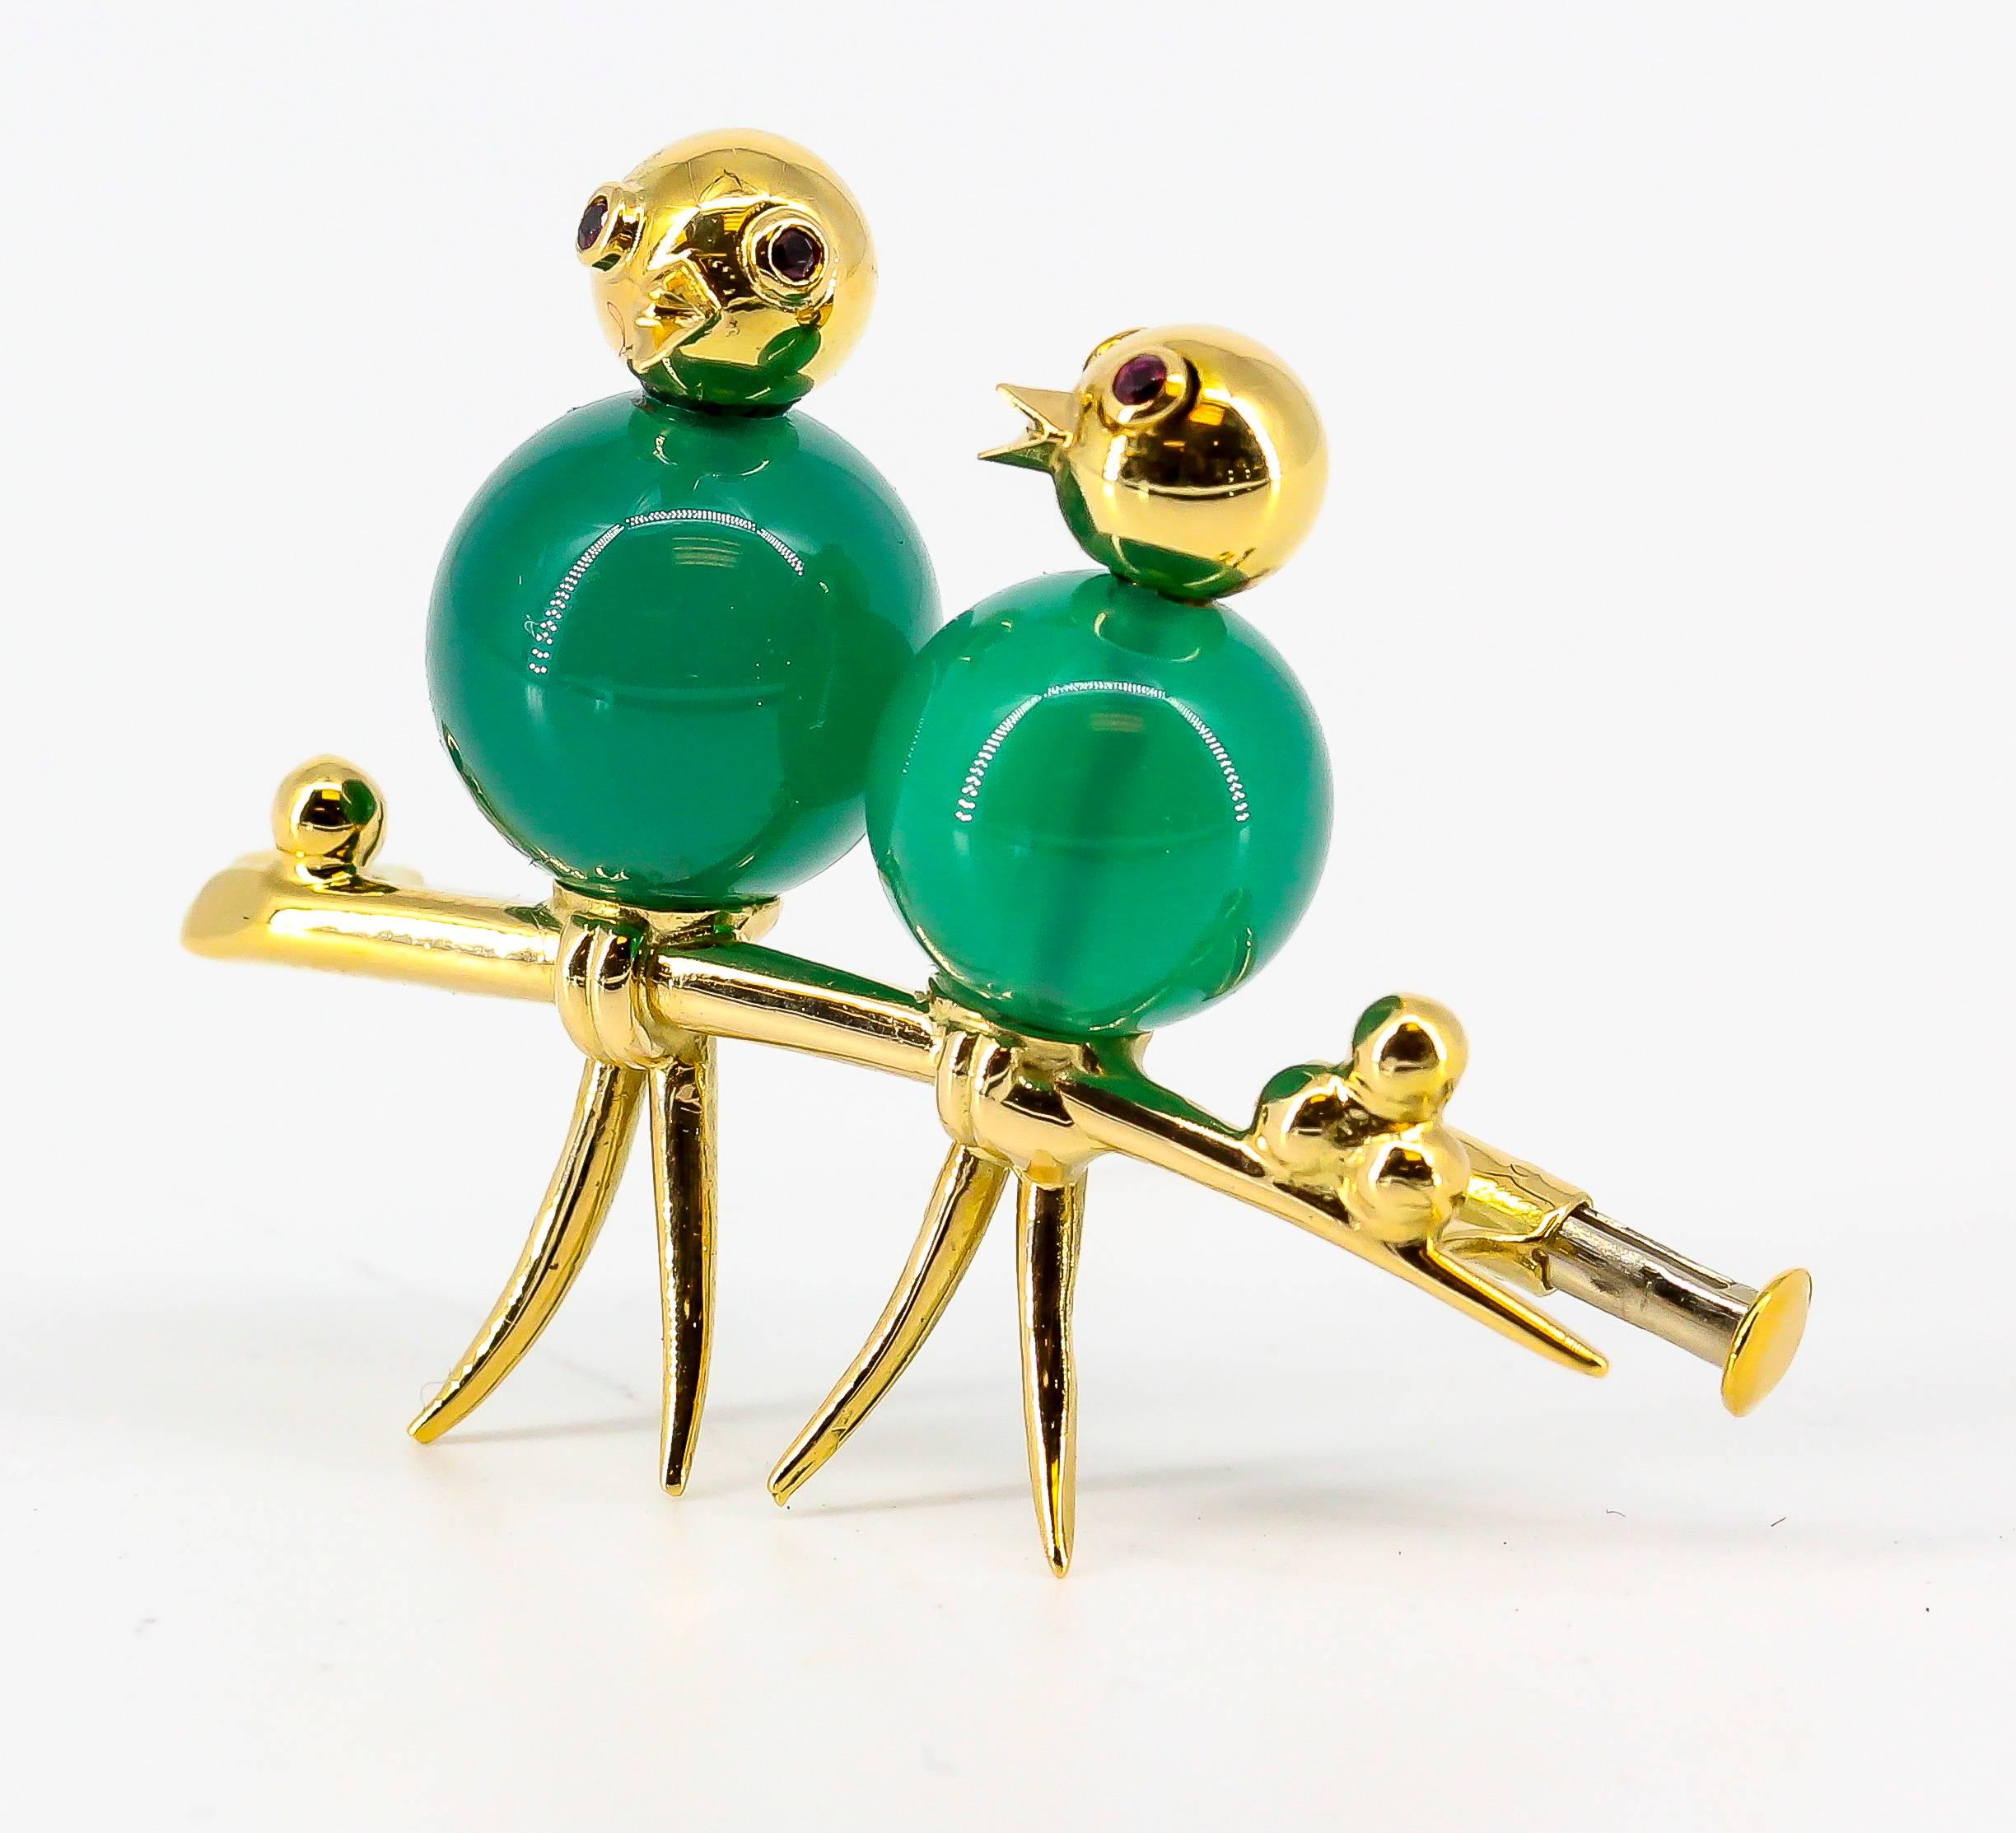 Whimsical chalcedony, ruby and 18K yellow gold brooch by Mellerio. It resembles two birds perched next to each other, with green chalcedony bodies, rich red rubies as eyes and 18K yellow gold setting.

Hallmarks: Mellerio Paris, reference numbers,